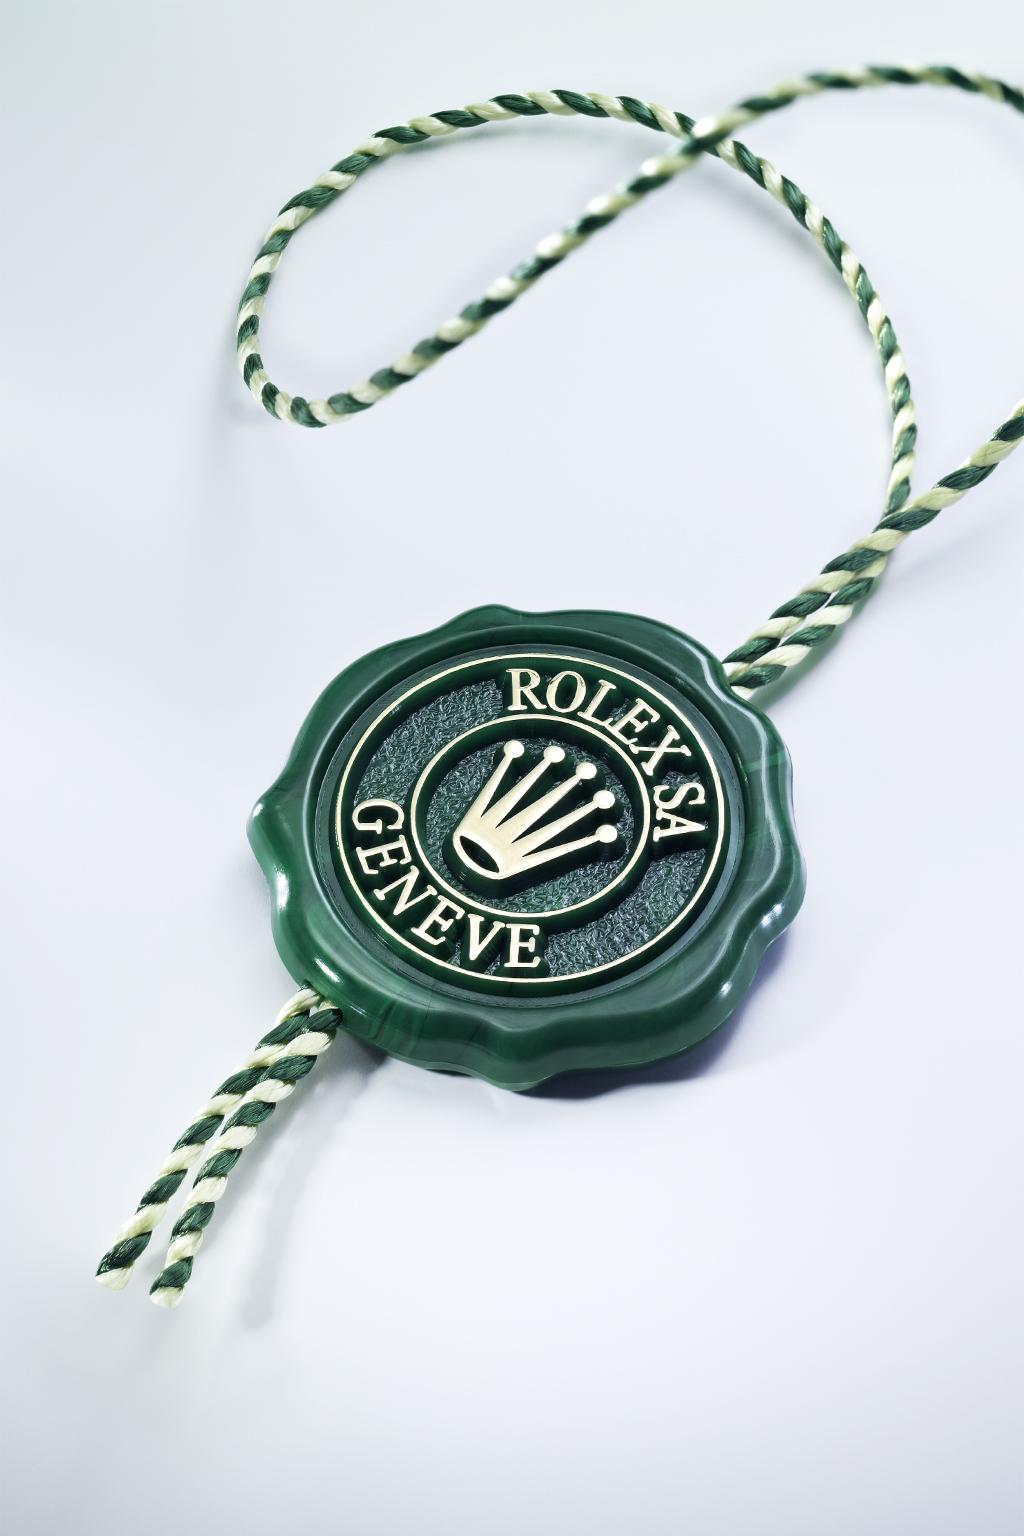 Features SUPERLATIVE CHRONOMETER The green seal accompanying every Rolex watch is a symbol of its status as a Superlative Chronometer.